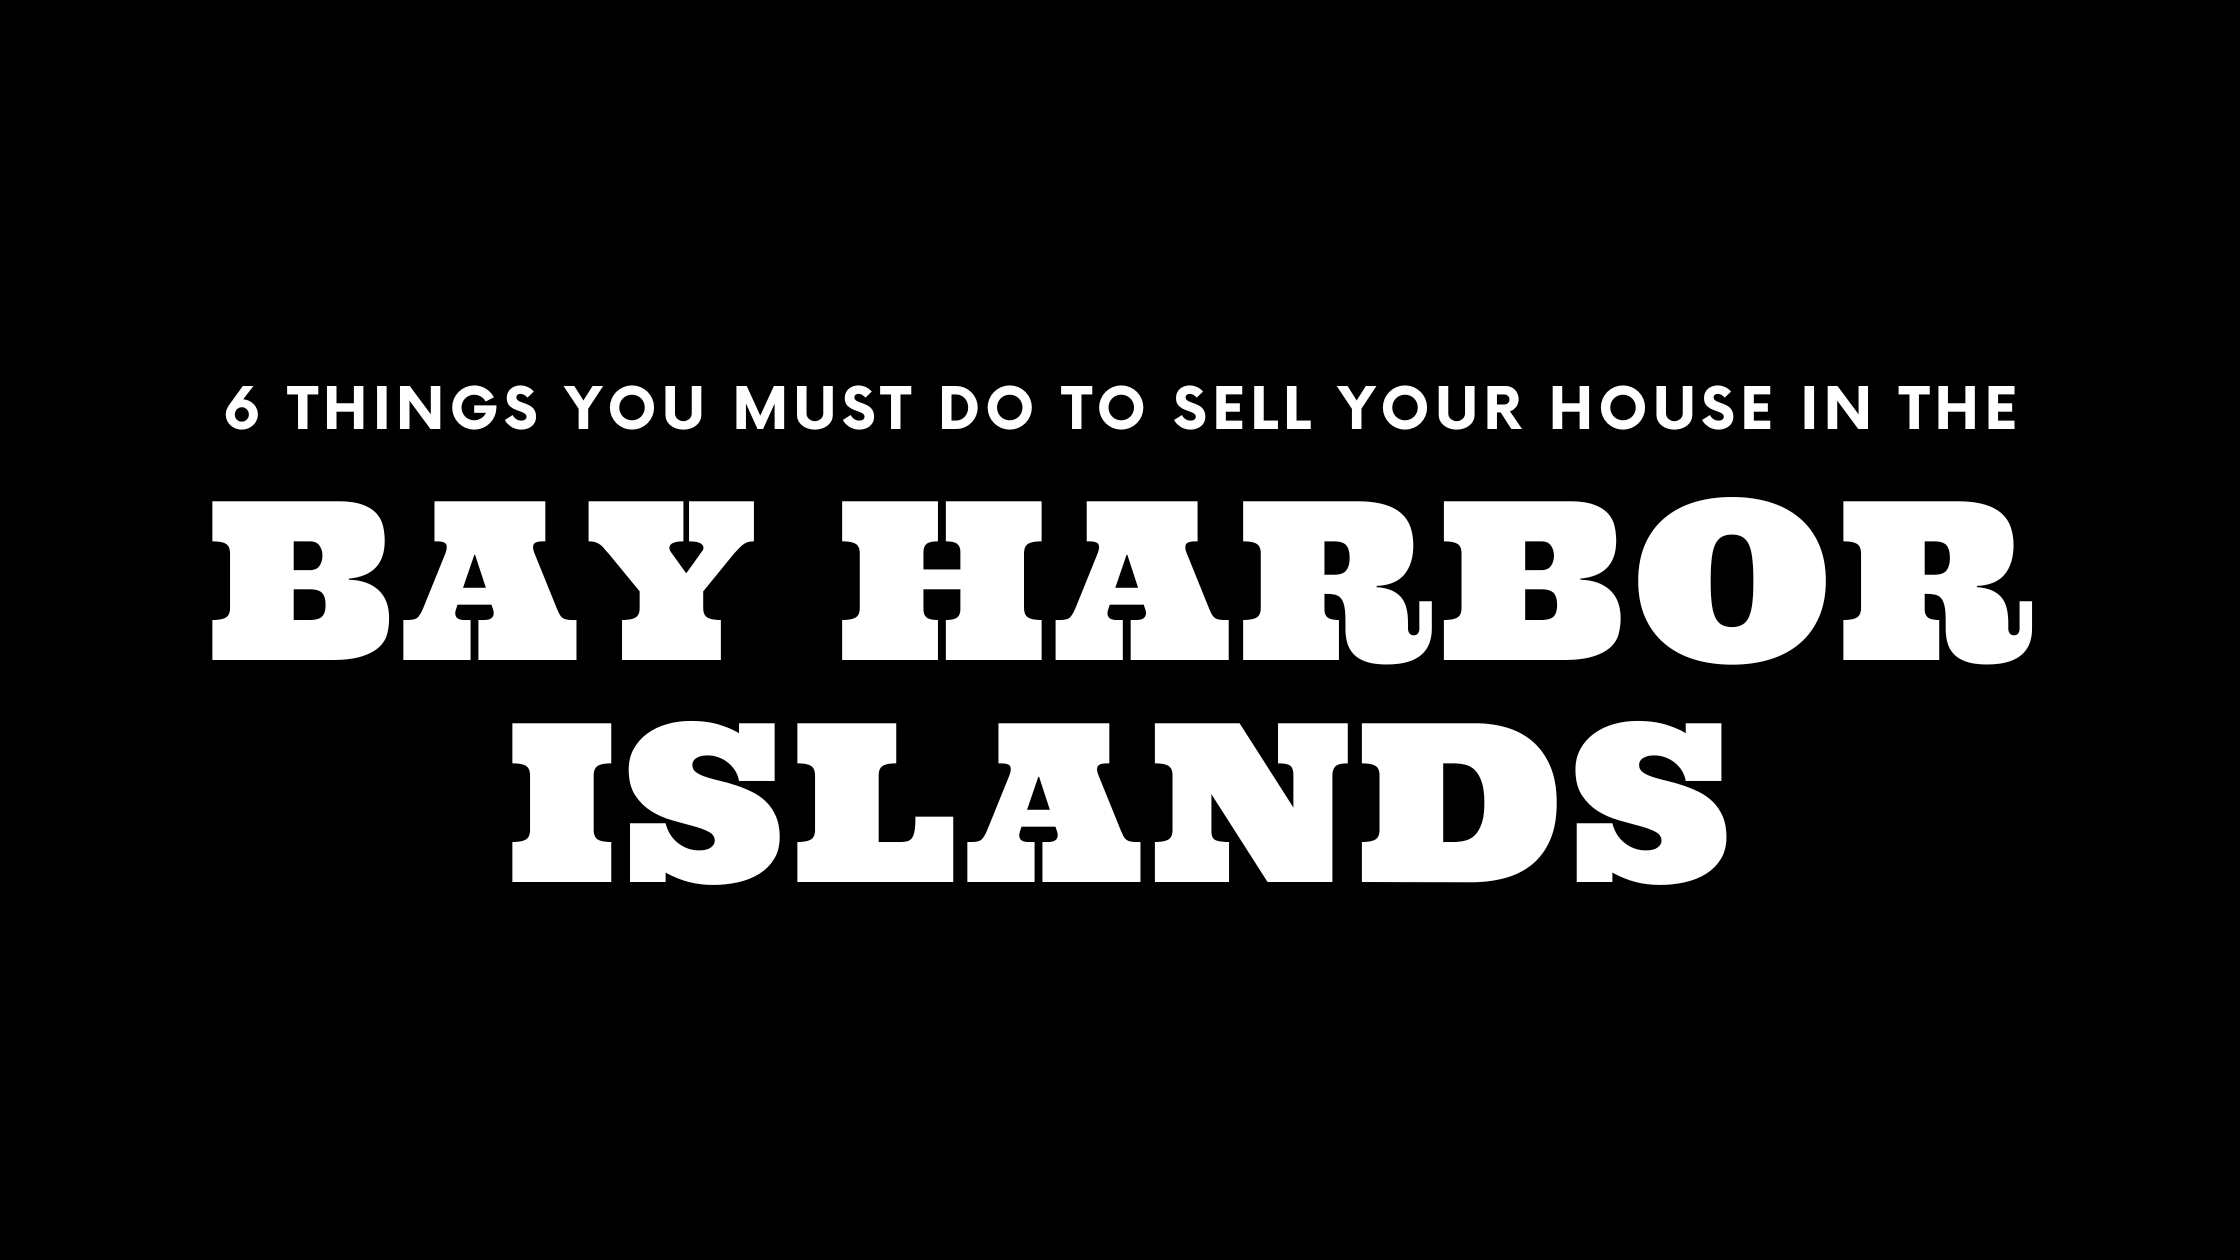 Selling Your House in the Bay Harbor Islands? 6 Things You MUST Do!